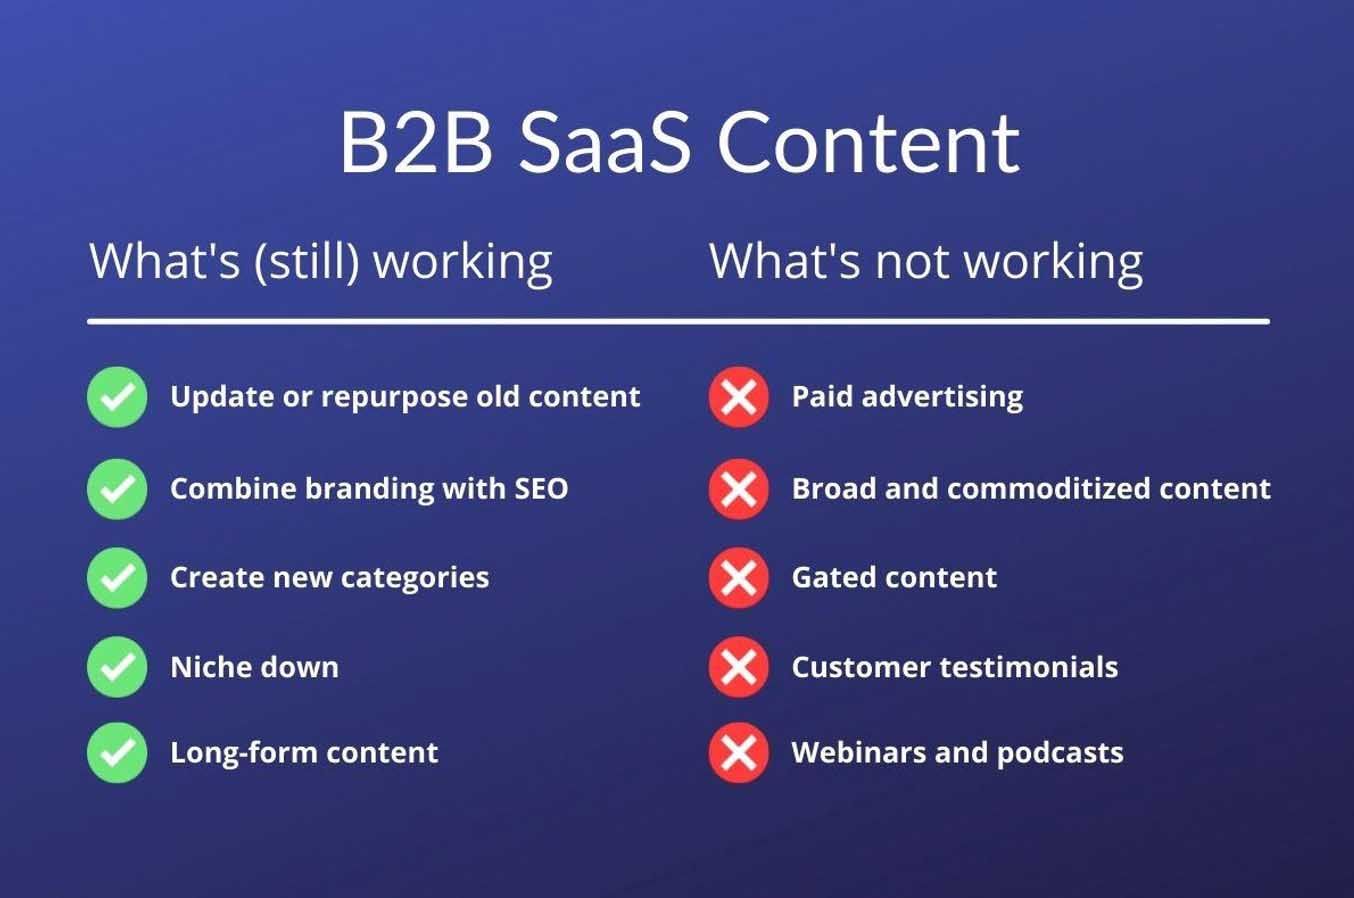 The State of B2B Content Marketing for SaaS in 2021